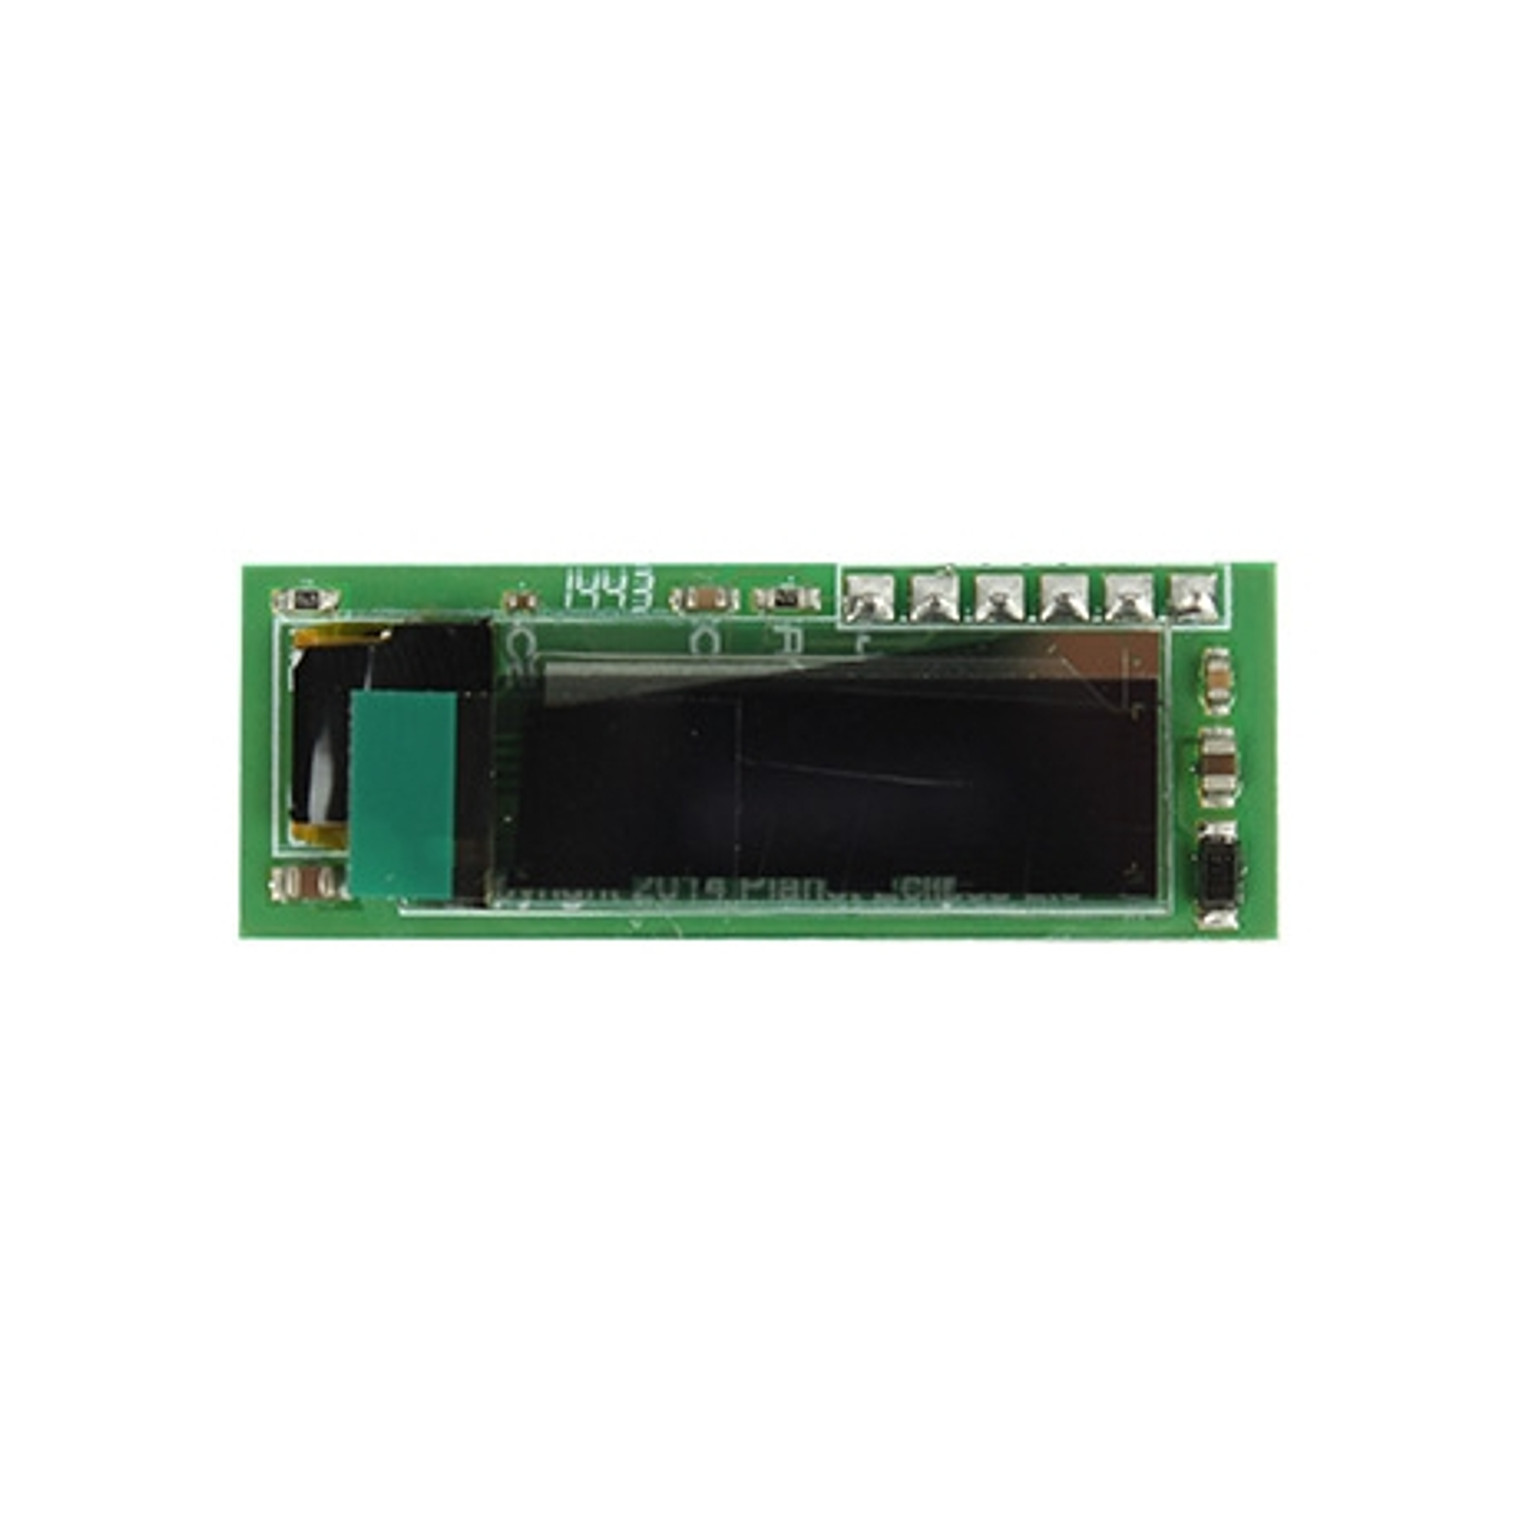 Planet Eclipse ETek5 OLED Circuit Board Assembly